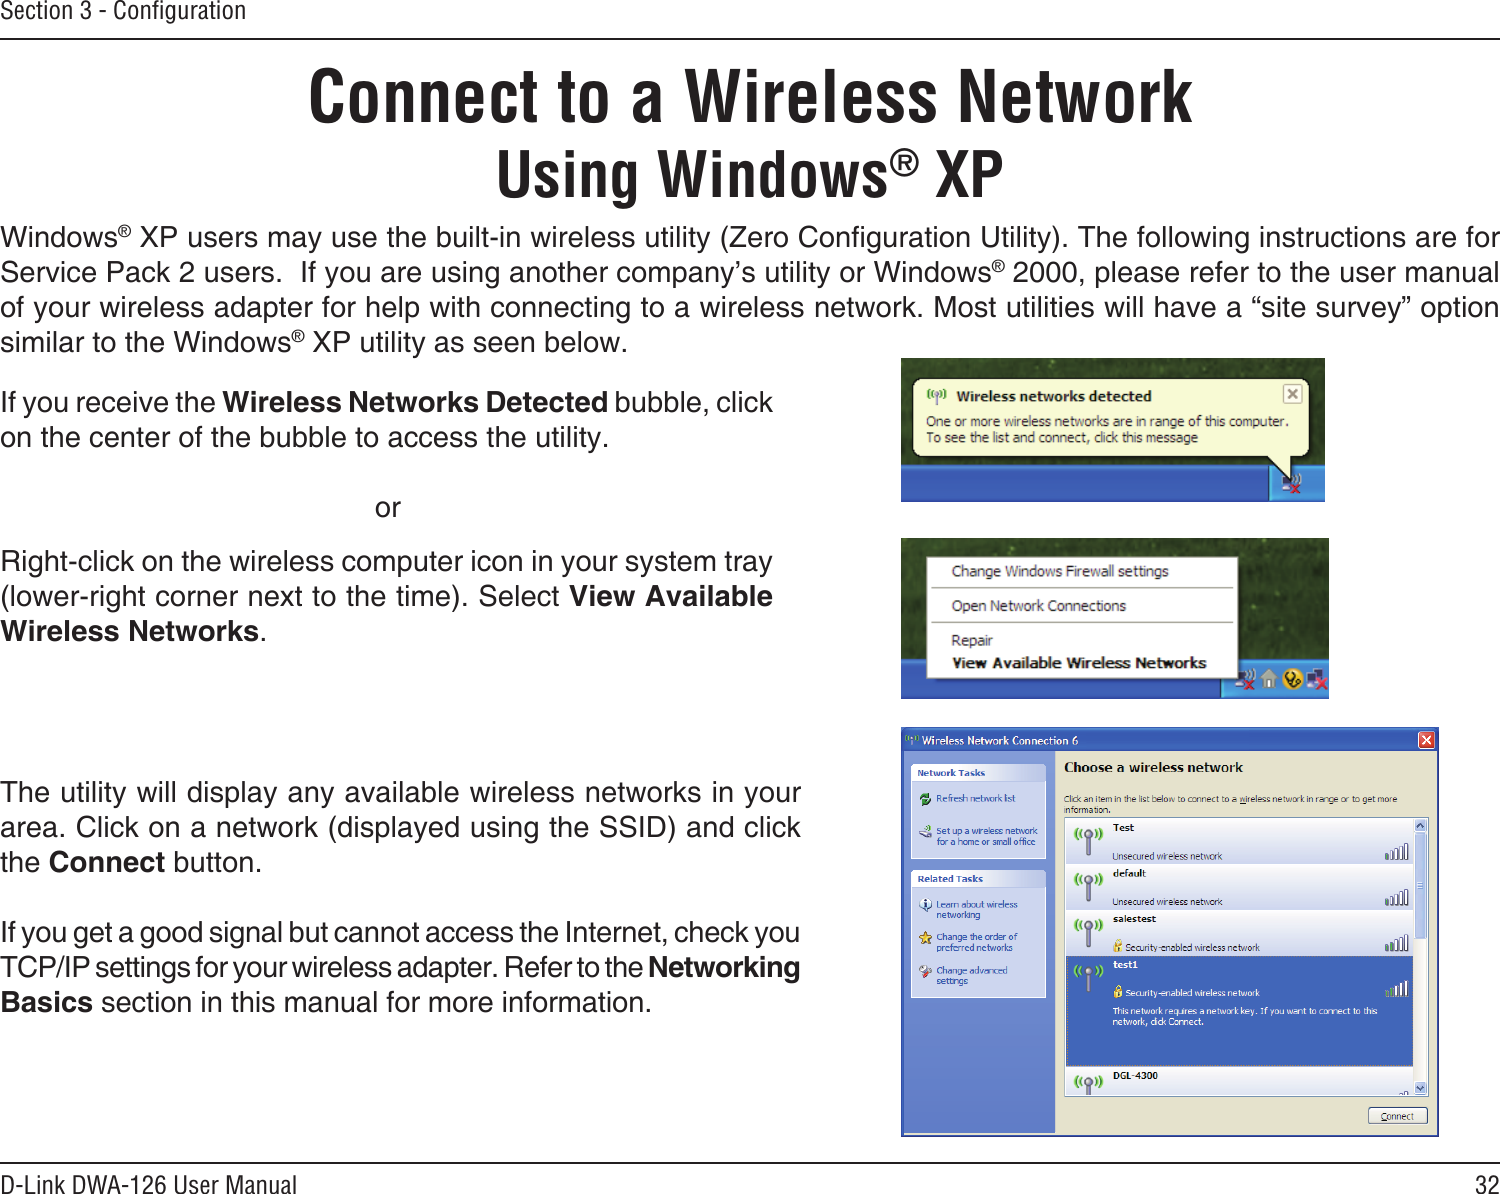 32D-Link DWA-126 User ManualSection 3 - ConﬁgurationConnect to a Wireless NetworkUsing Windows® XPWindows® XP users may use the built-in wireless utility (Zero Conguration Utility). The following instructions are for Service Pack 2 users.  If you are using another company’s utility or Windows® 2000, please refer to the user manual of your wireless adapter for help with connecting to a wireless network. Most utilities will have a “site survey” option similar to the Windows® XP utility as seen below.Right-click on the wireless computer icon in your system tray (lower-right corner next to the time). Select View Available Wireless Networks.If you receive the Wireless Networks Detected bubble, click on the center of the bubble to access the utility.     orThe utility will display any available wireless networks in your area. Click on a network (displayed using the SSID) and click the Connect button.If you get a good signal but cannot access the Internet, check you TCP/IP settings for your wireless adapter. Refer to the Networking Basics section in this manual for more information.